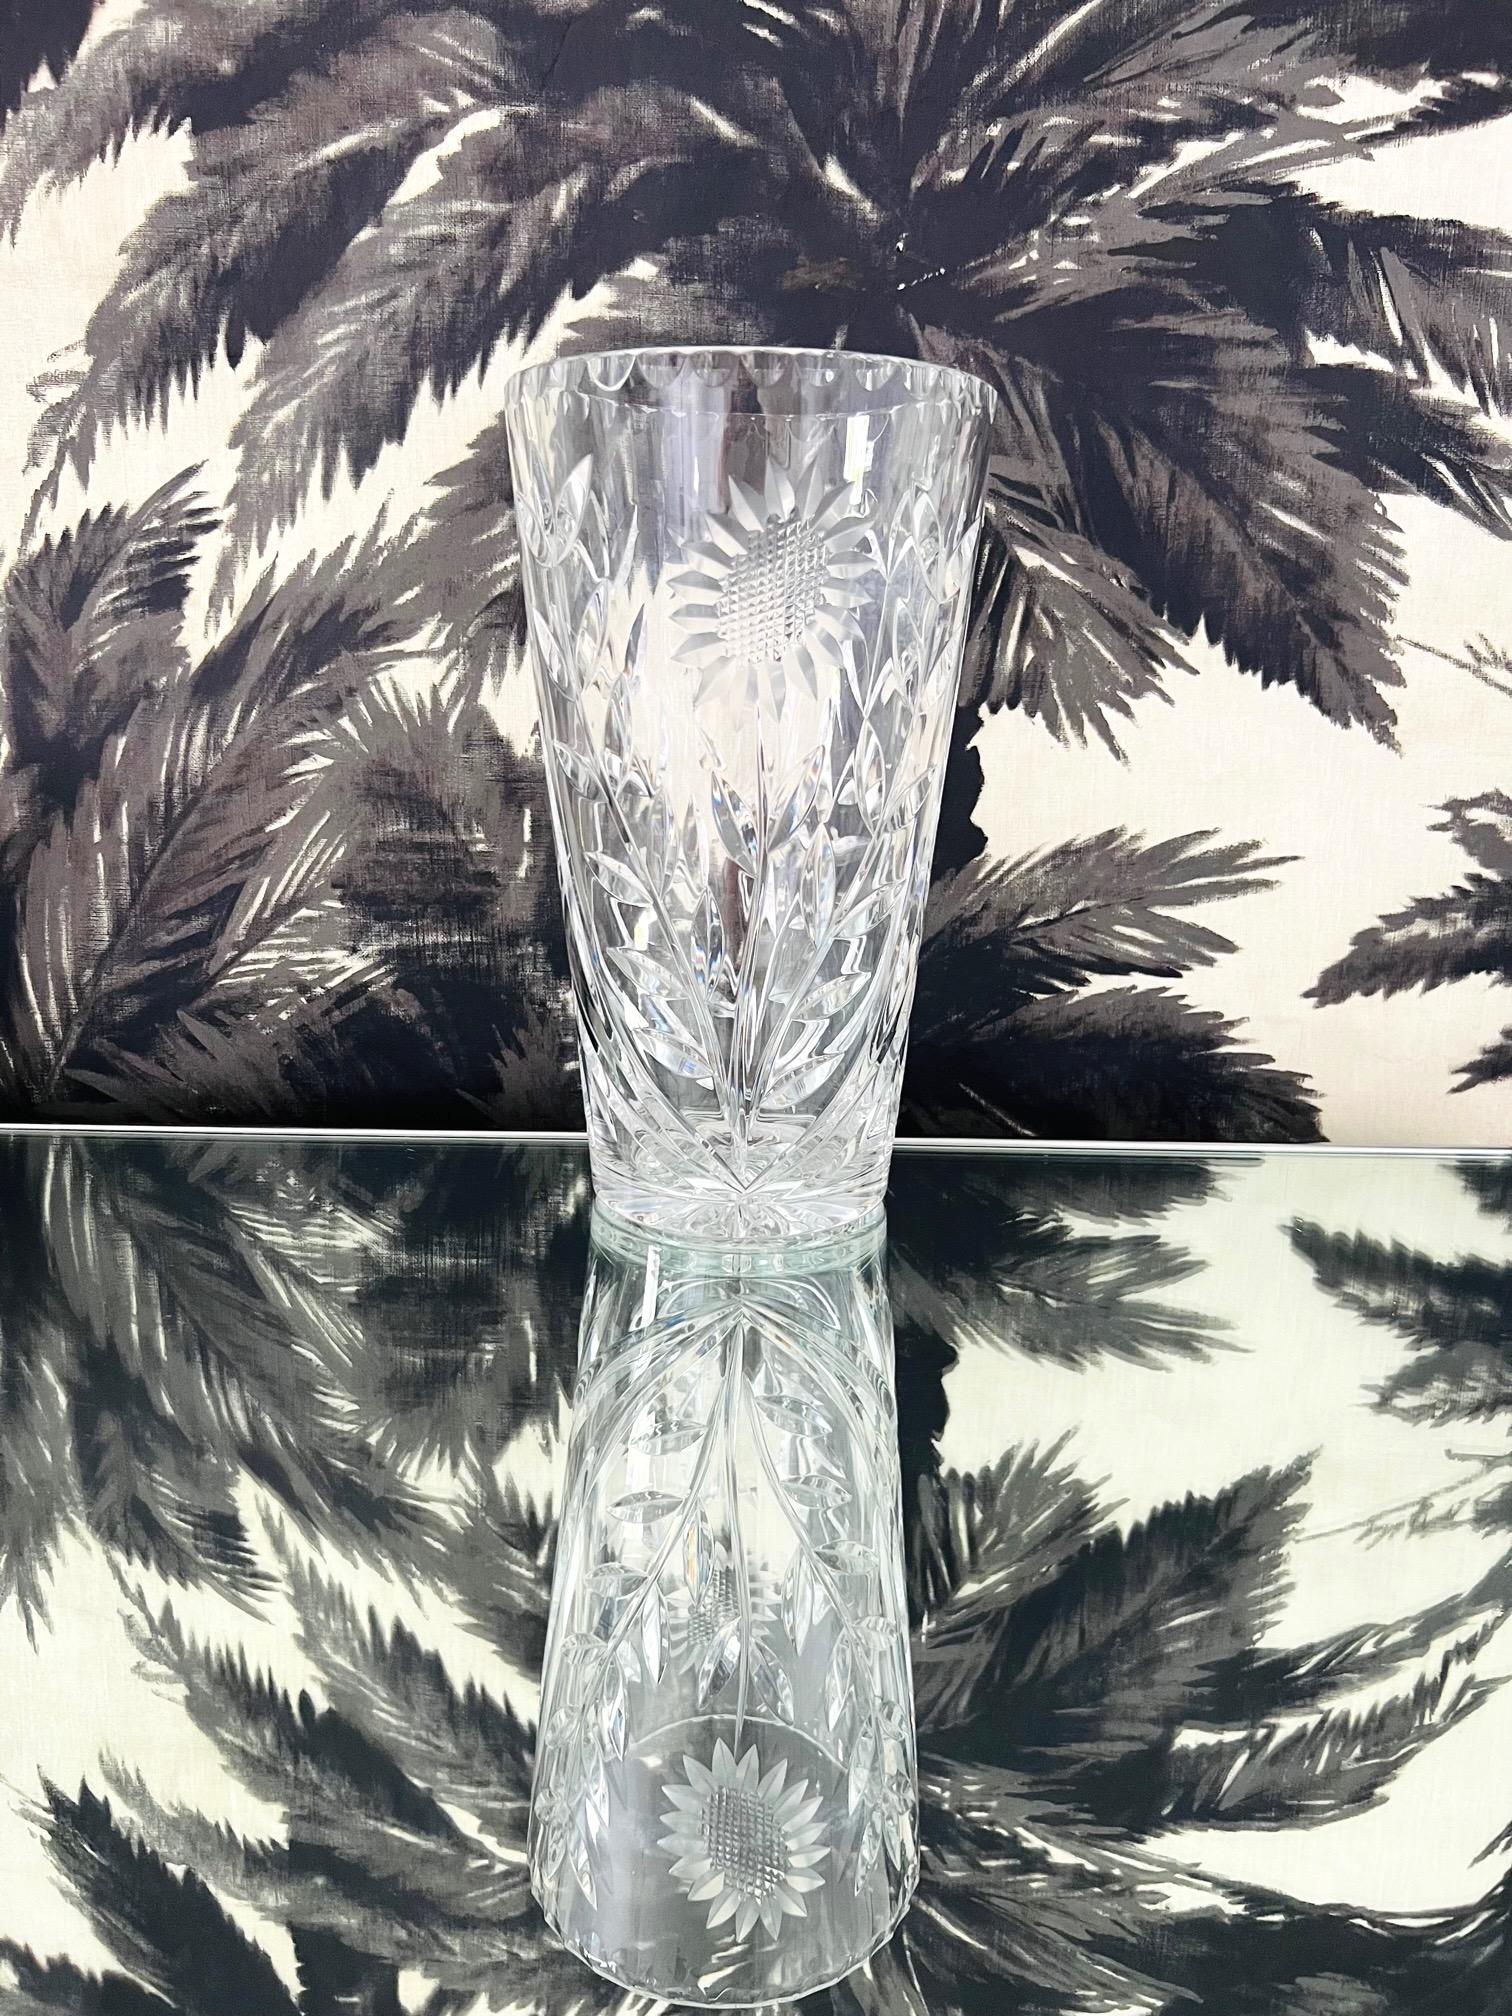 Waterford Crystal Etched Sunflower Vase with Cut Glass Designs, England, c. 2010 For Sale 6